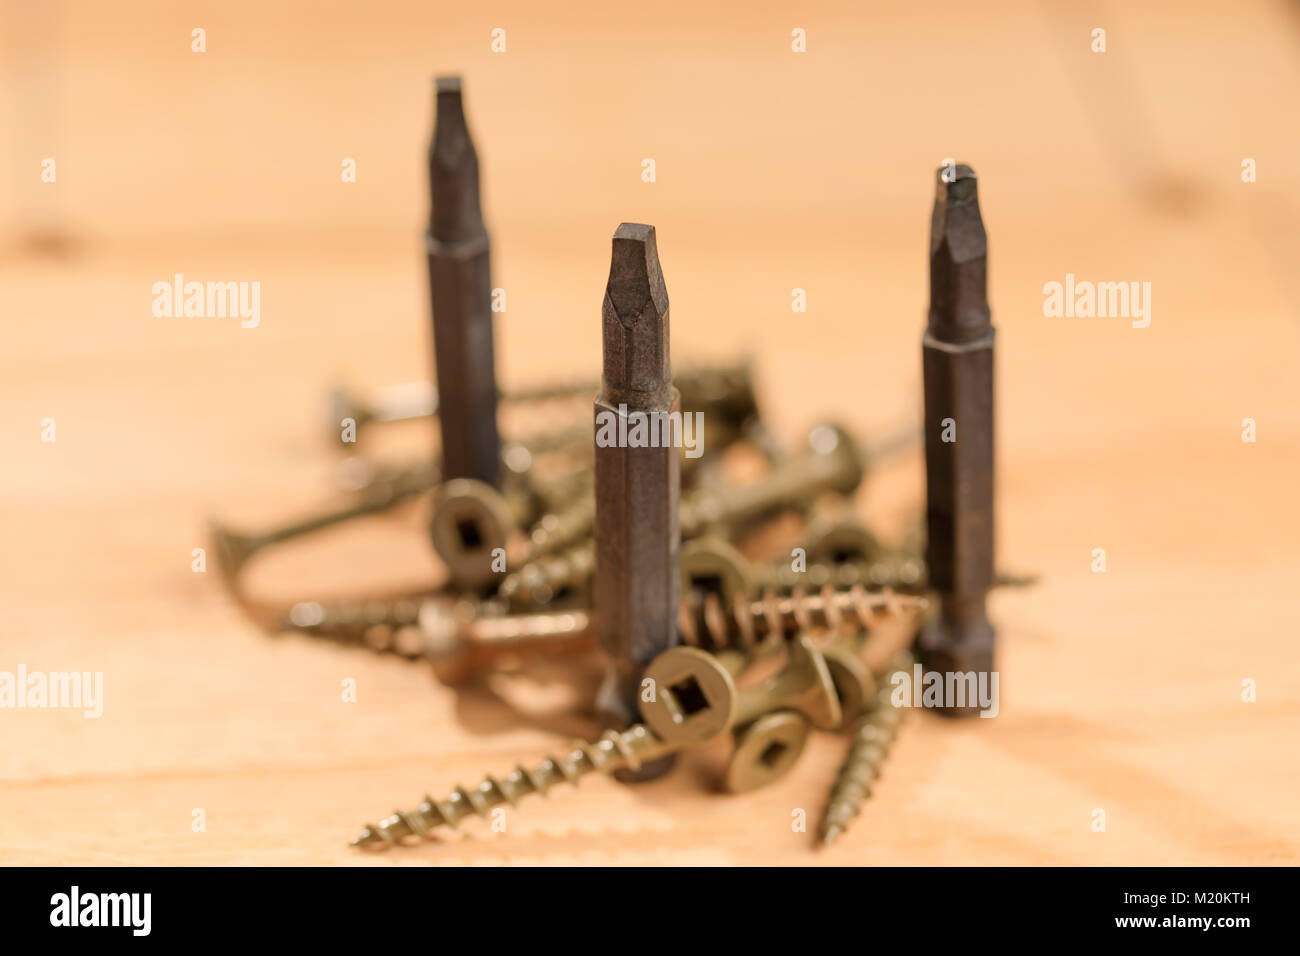 Bits for screwdrivers along with several screws placed on a wooden board. Set of heads for screwdriver (bits). Tools collection of drywall screws. Stock Photo